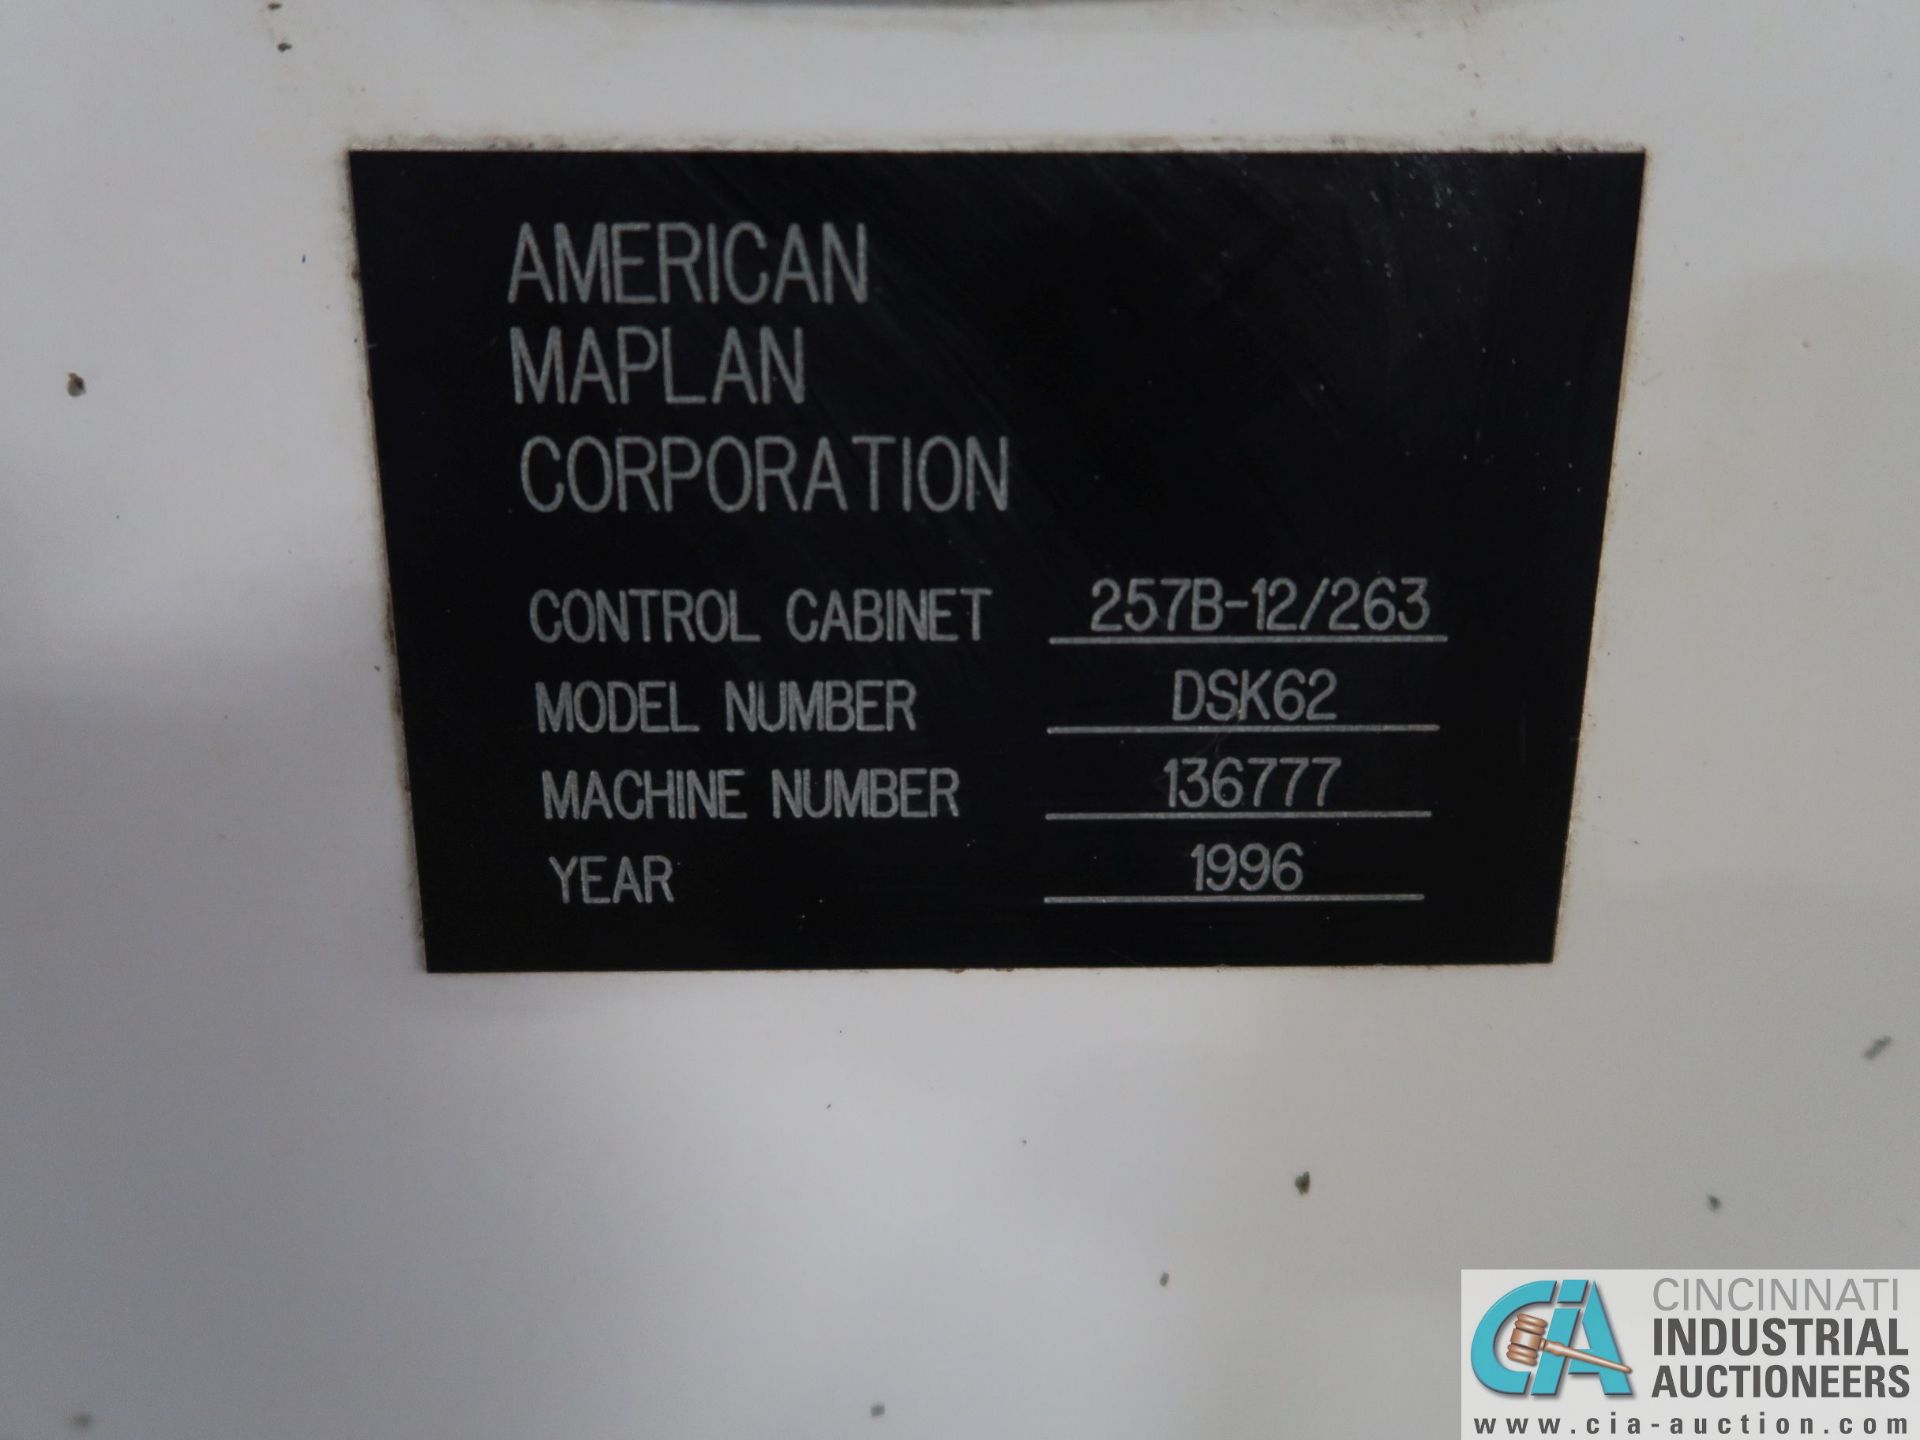 64-MM AMERICAN MAPLAN MODEL DSK64 RIGHT HAND FEED CO-EXTRUDER; S/N 136777 (NEW 1996) 40 HP MOTOR - Image 17 of 20